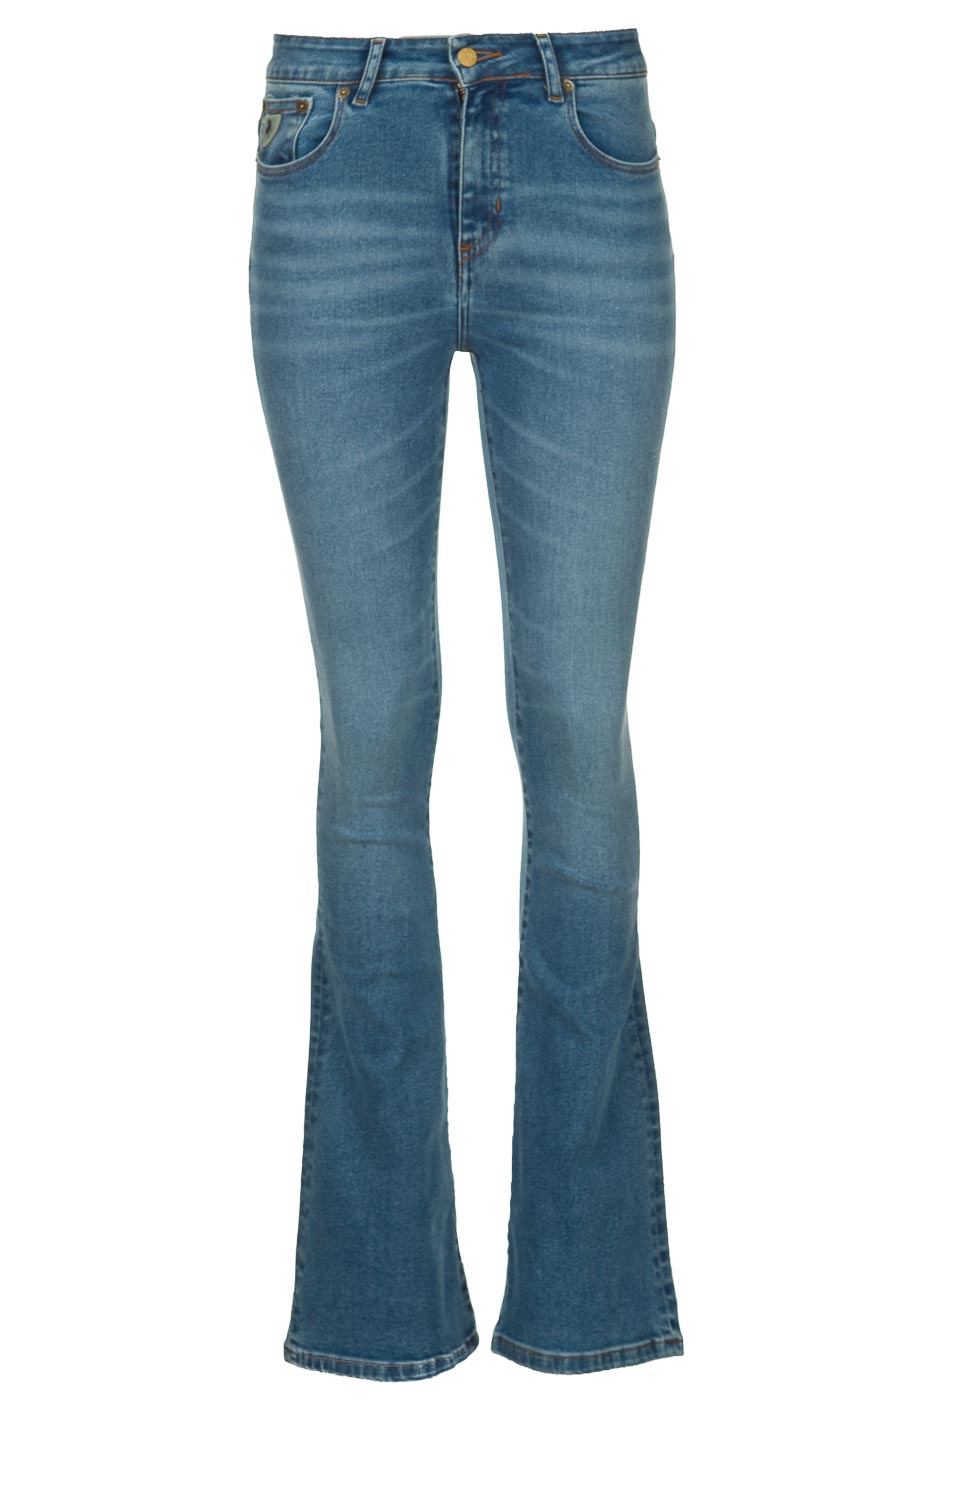 lois jeans flare